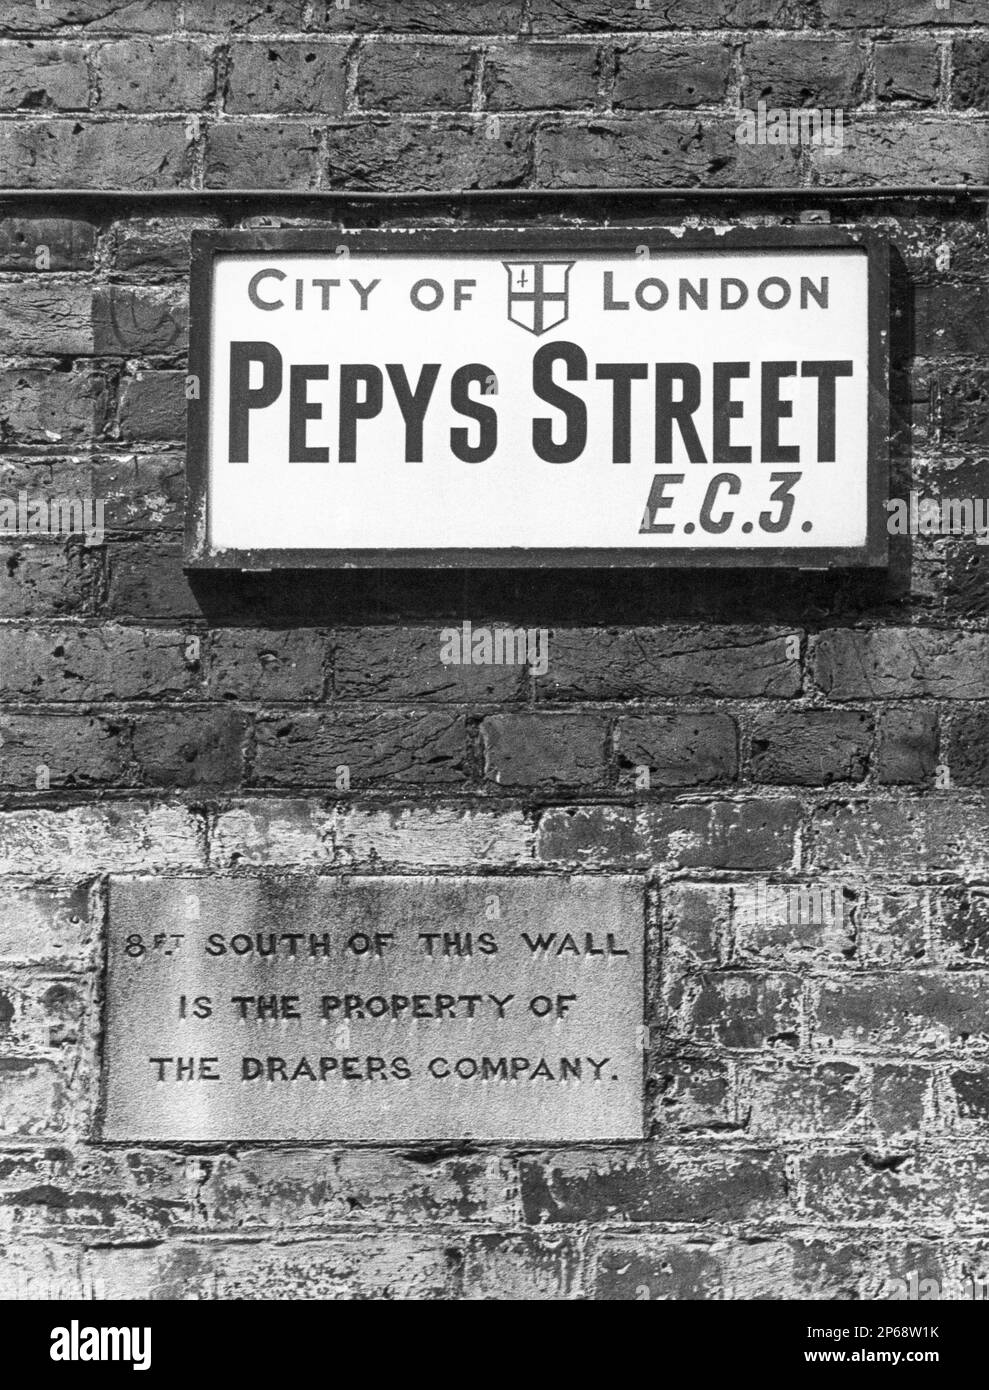 A sign for Pepys Street E.C.3. in the City of London, England UK - Photograph taken in 1970. Stock Photo